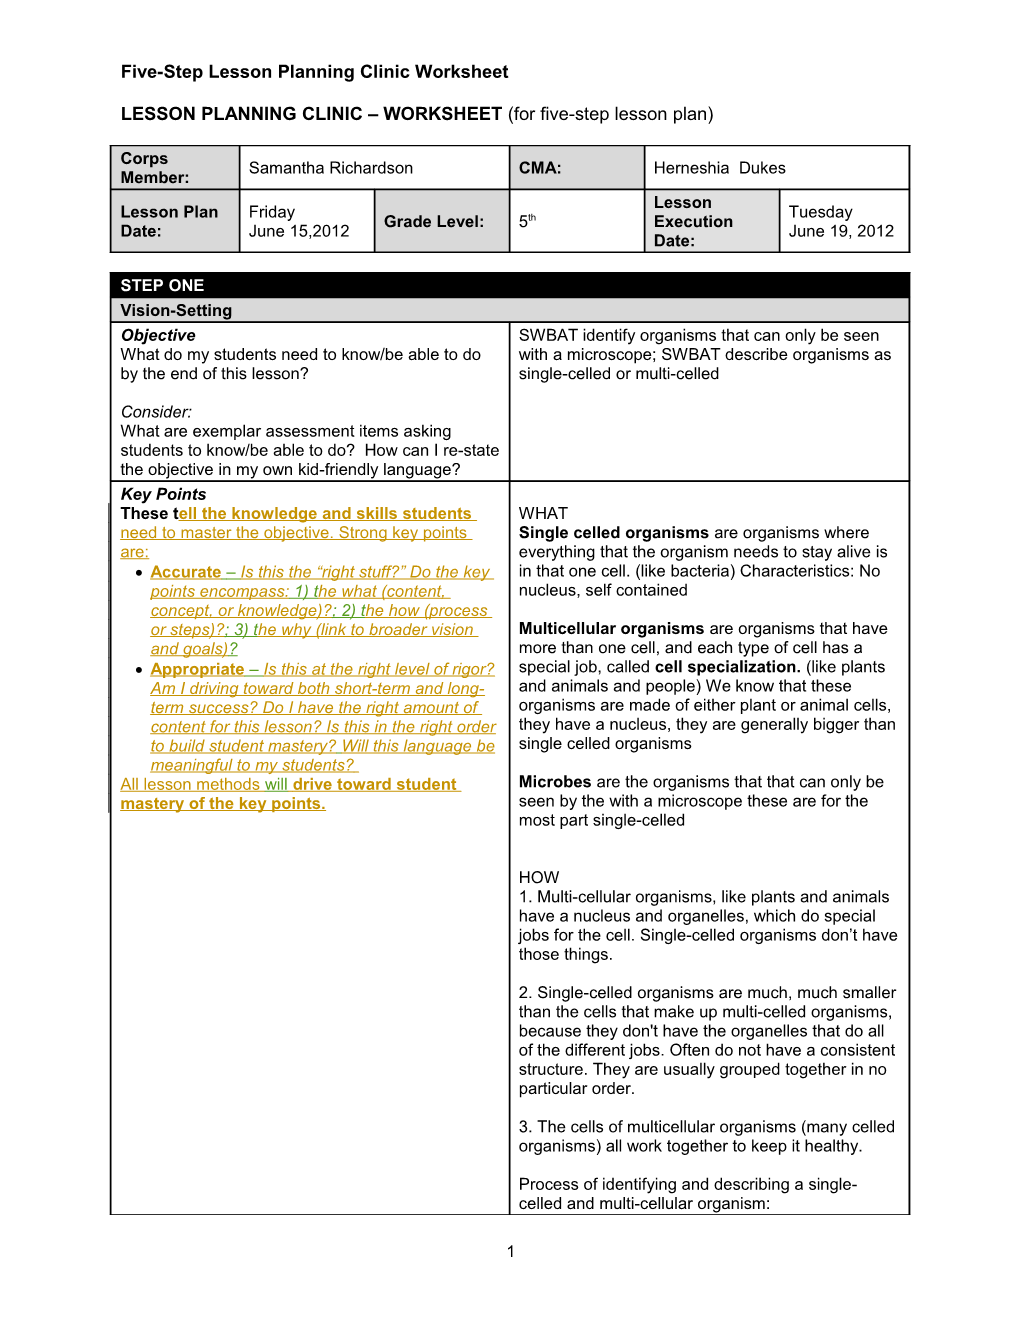 LESSON PLANNING CLINIC WORKSHEET (For Five-Step Lesson Plan)